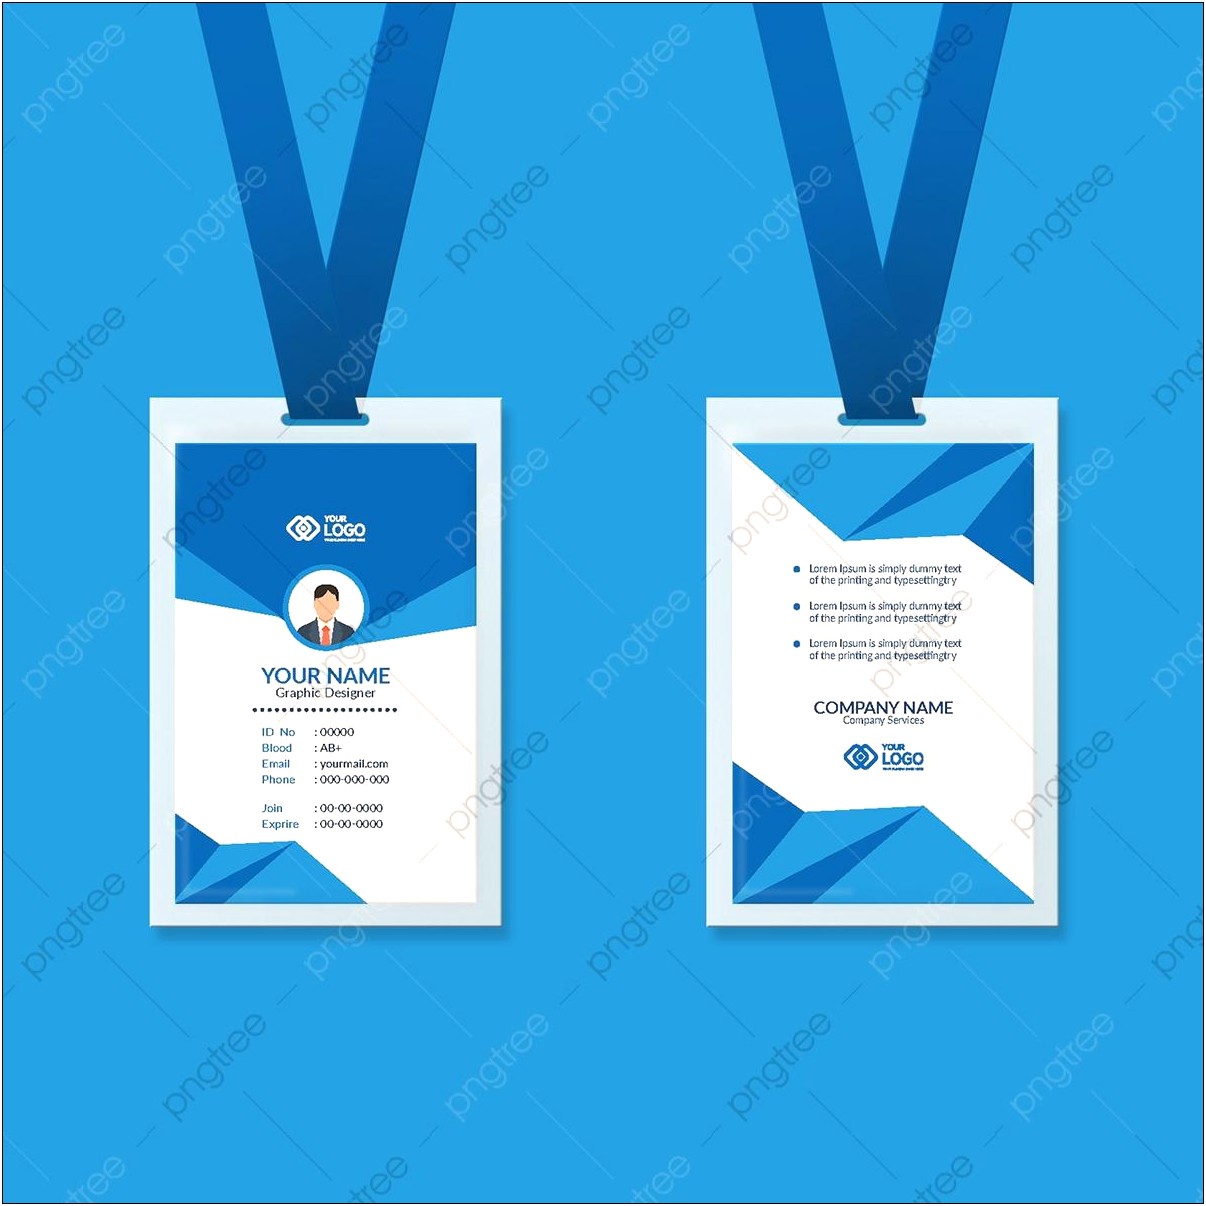 free-download-employee-id-card-template-resume-example-gallery